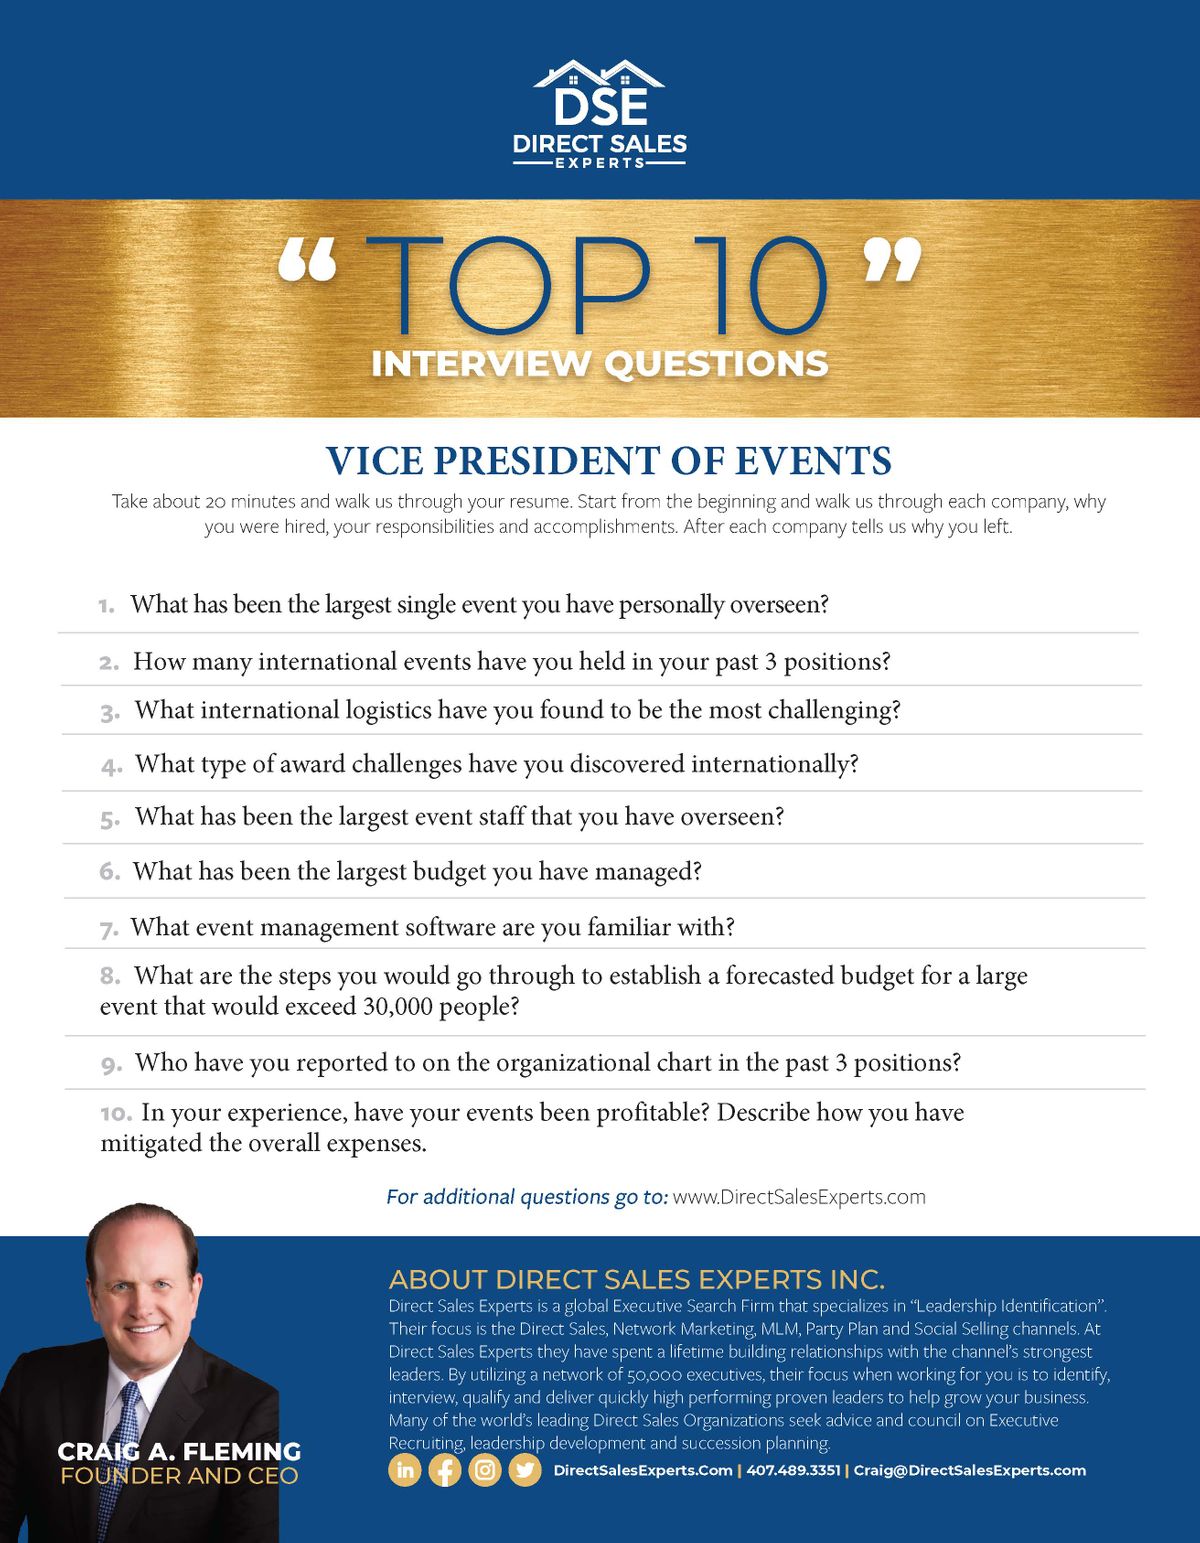 DirectSalesExperts_Top10-VPofEvents-pdf_Page_1 (1).jpg